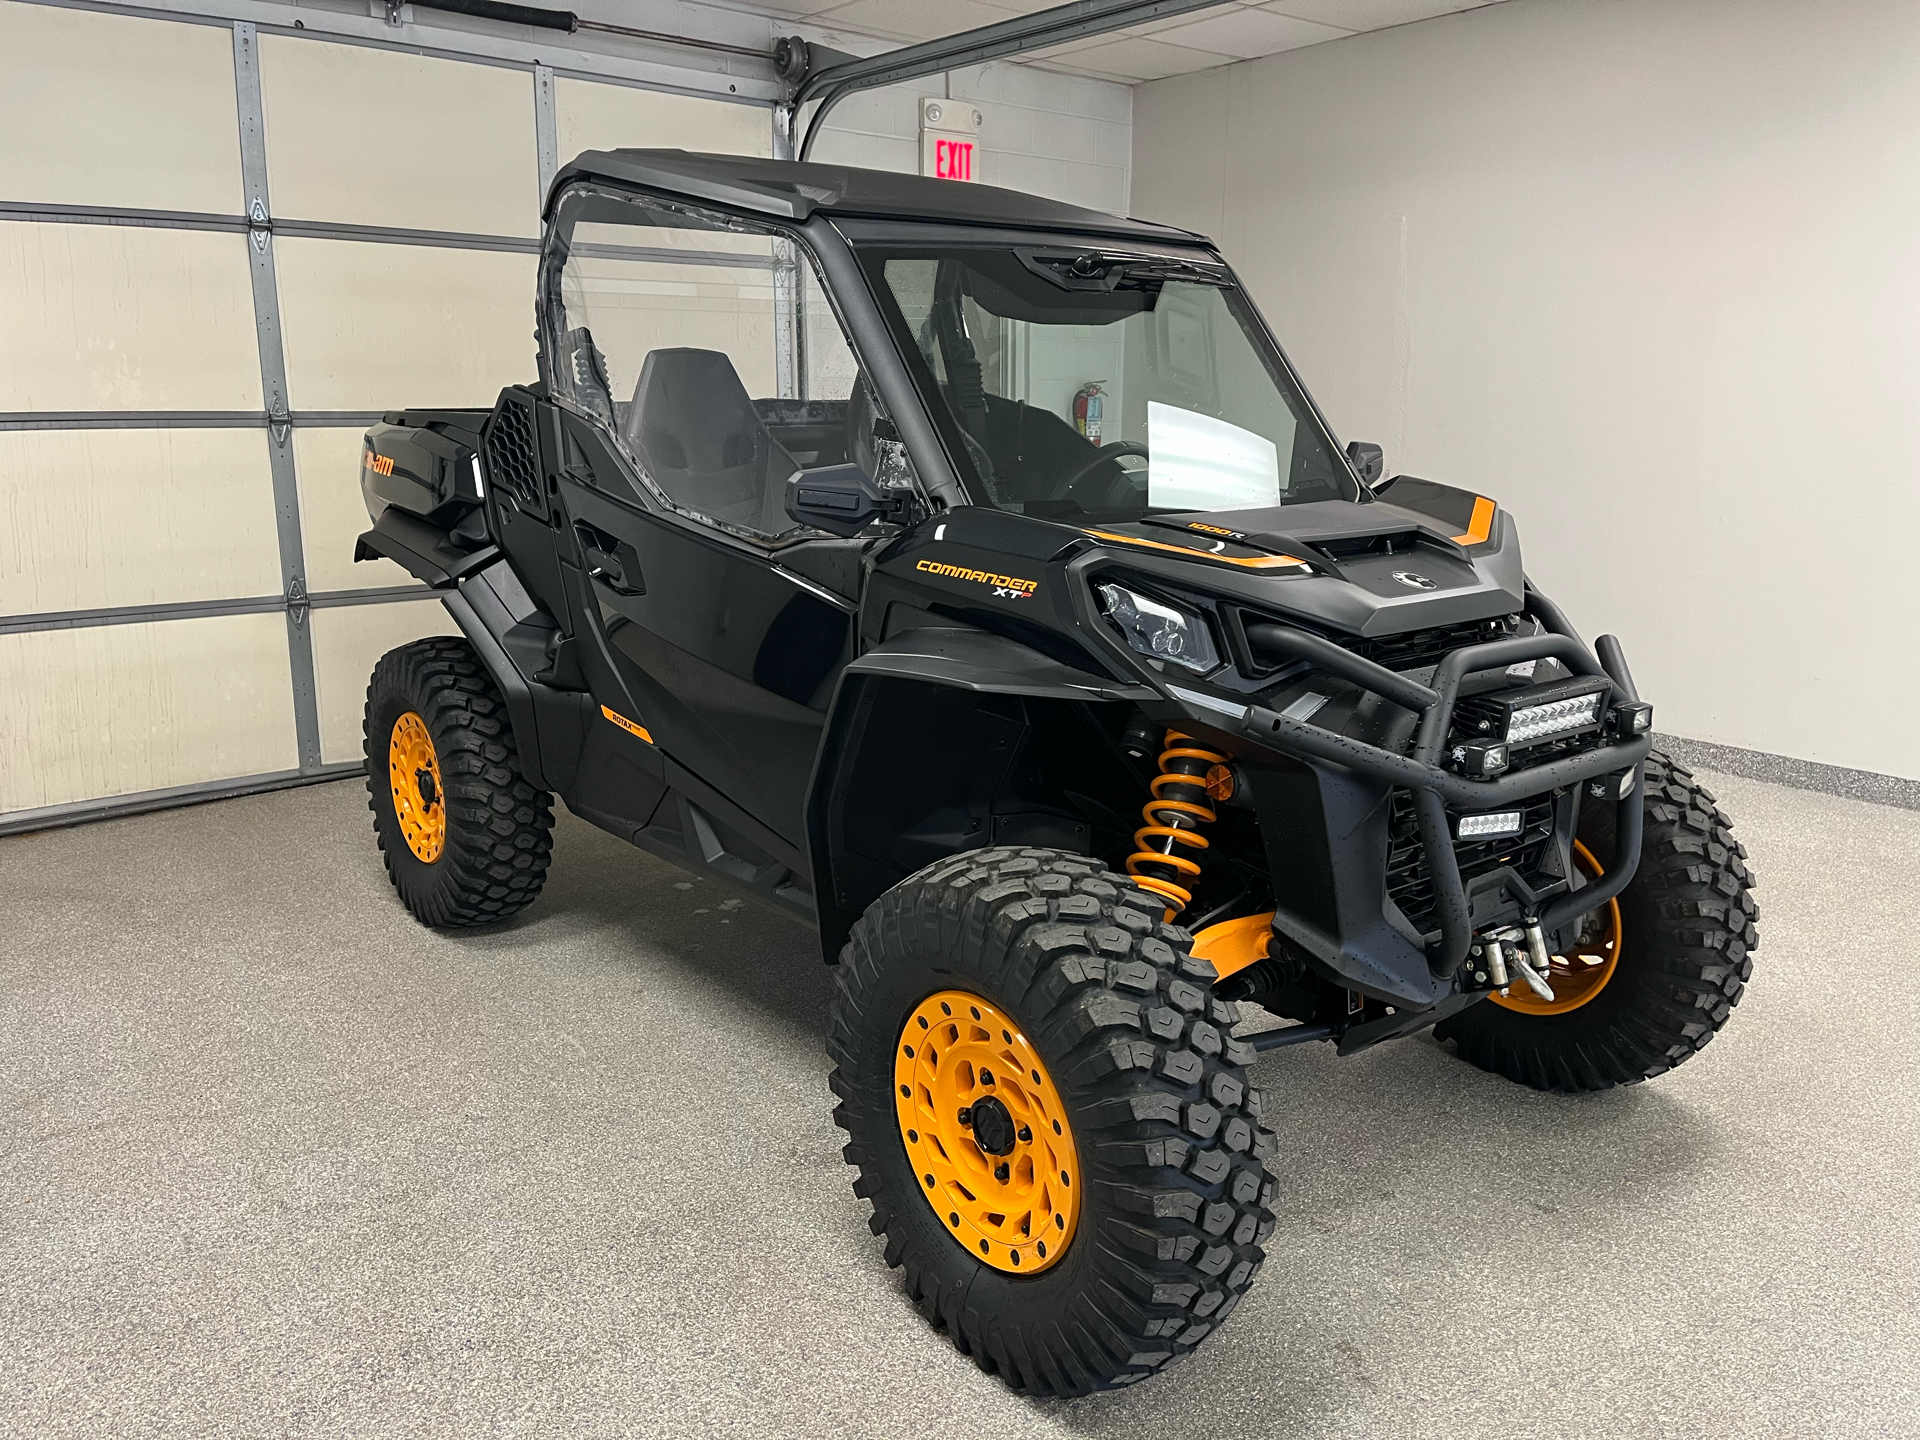 2022 Can-Am Commander XT-P 1000R in Sheridan, Wyoming - Photo 7